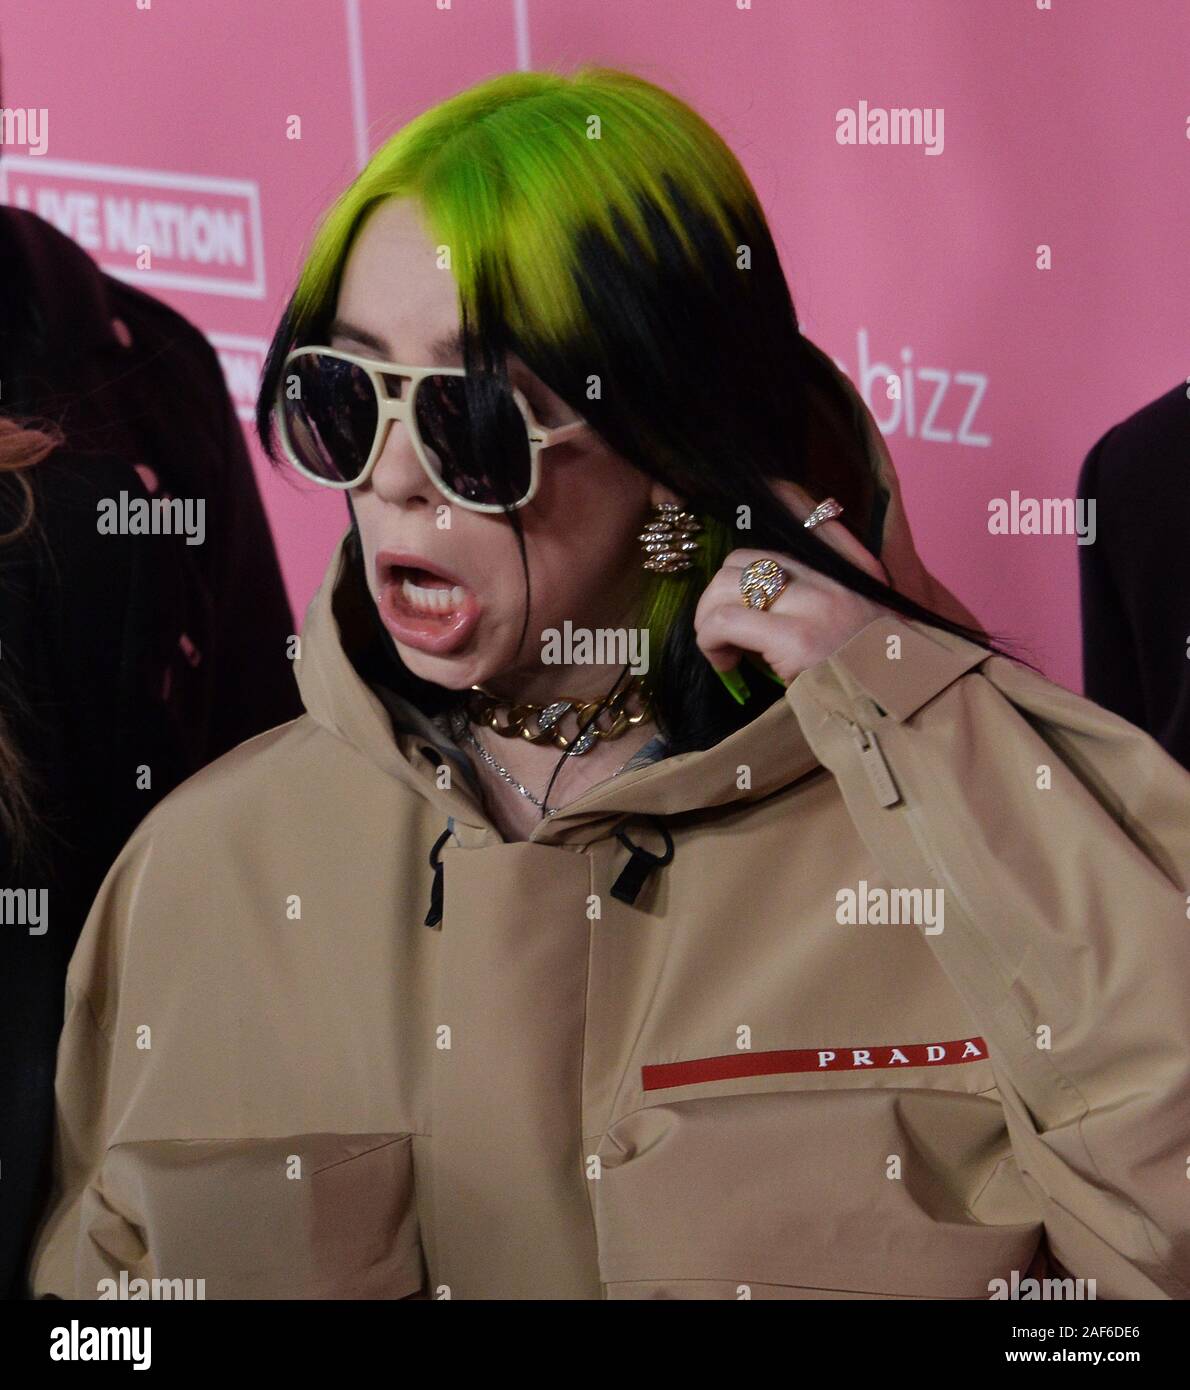 Los Angeles, United States. 13th Dec, 2019. Singer and songwriter Billie Eilish arrives for the 14th annual Billboard Women in Music event at the Hollywood Palladium in Los Angeles on Thursday, December 12, 2019. Taylor Swift became the first-ever recipient of Billboard's Woman of the Decade Award. Alanis Morissette, Nicki Minaj, Brandi Carlile and Roc Nation chief operating officer Desiree Perez were also honored at the gathering. Photo by Jim Ruymen/UPI Credit: UPI/Alamy Live News Stock Photo